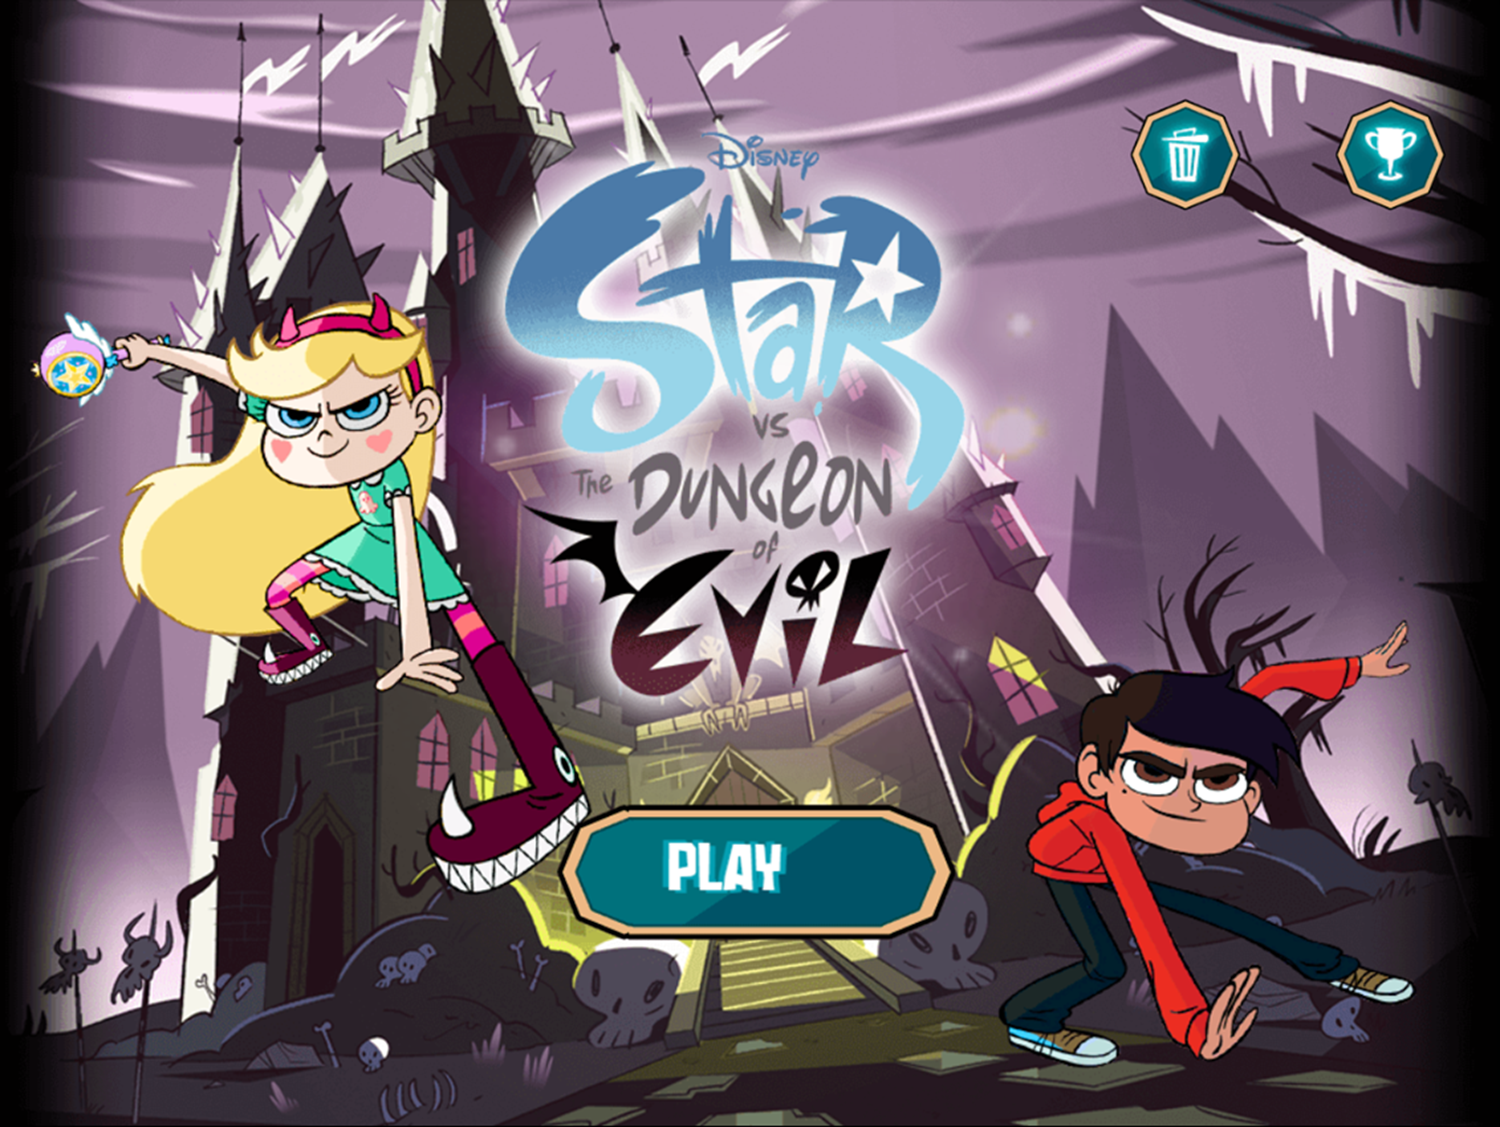 Star vs the Dungeon of Evil Game Welcome Screen Screenshot.